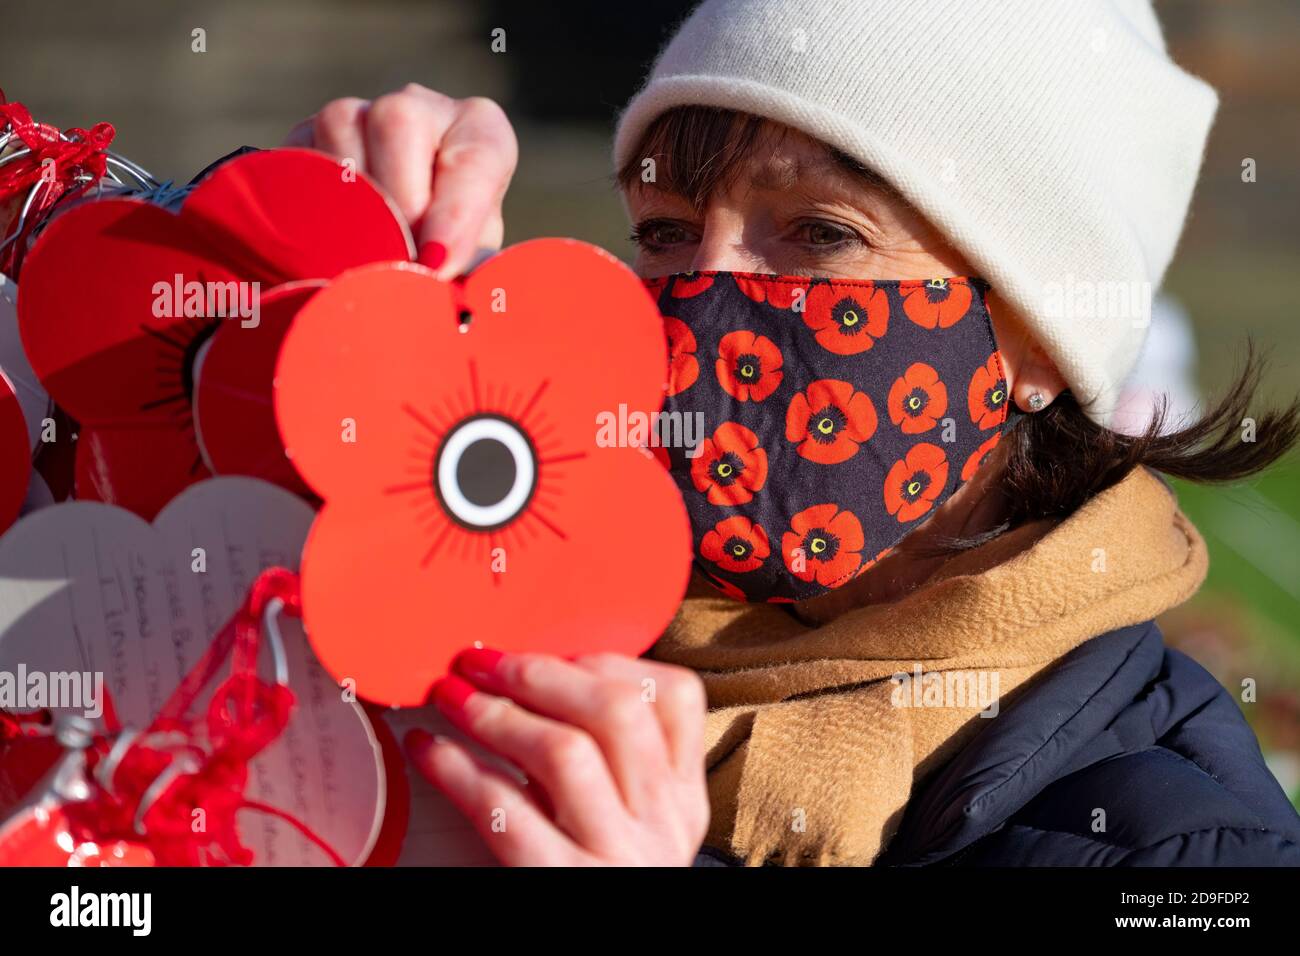 Edinburgh, Scotland, UK. 5 November 2020.  Members of the public pay their respects at garden of remembrance in Princes Street Gardens. Formal ceremonies have been cancelled because of Covid-19 on Remembrance Day. Iain Masterton/Alamy Live News Stock Photo